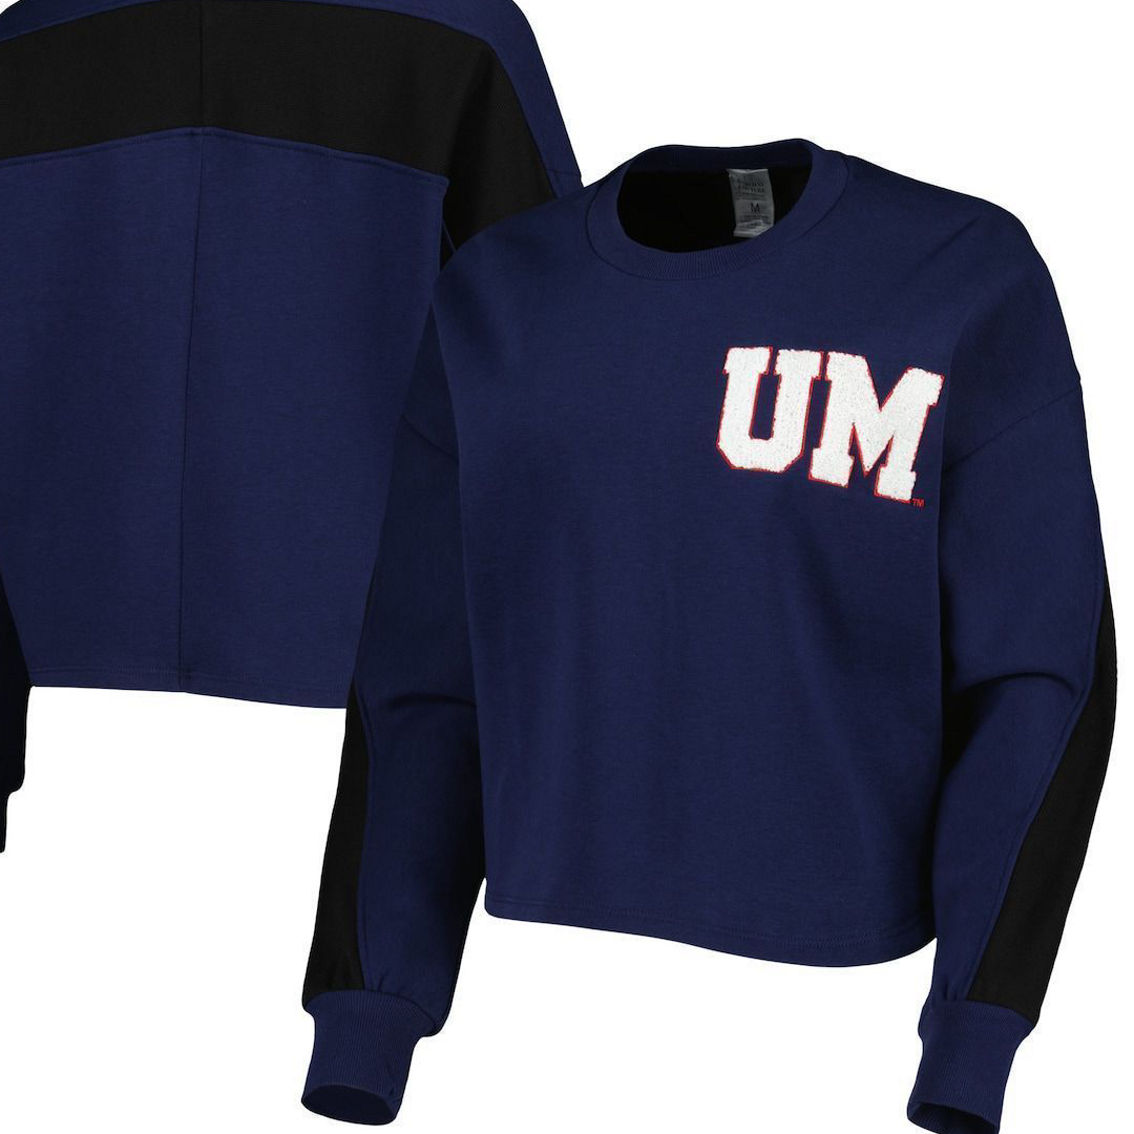 Gameday Couture Women's Navy Michigan Wolverines Back To Reality Colorblock Pullover Sweatshirt - Image 2 of 4